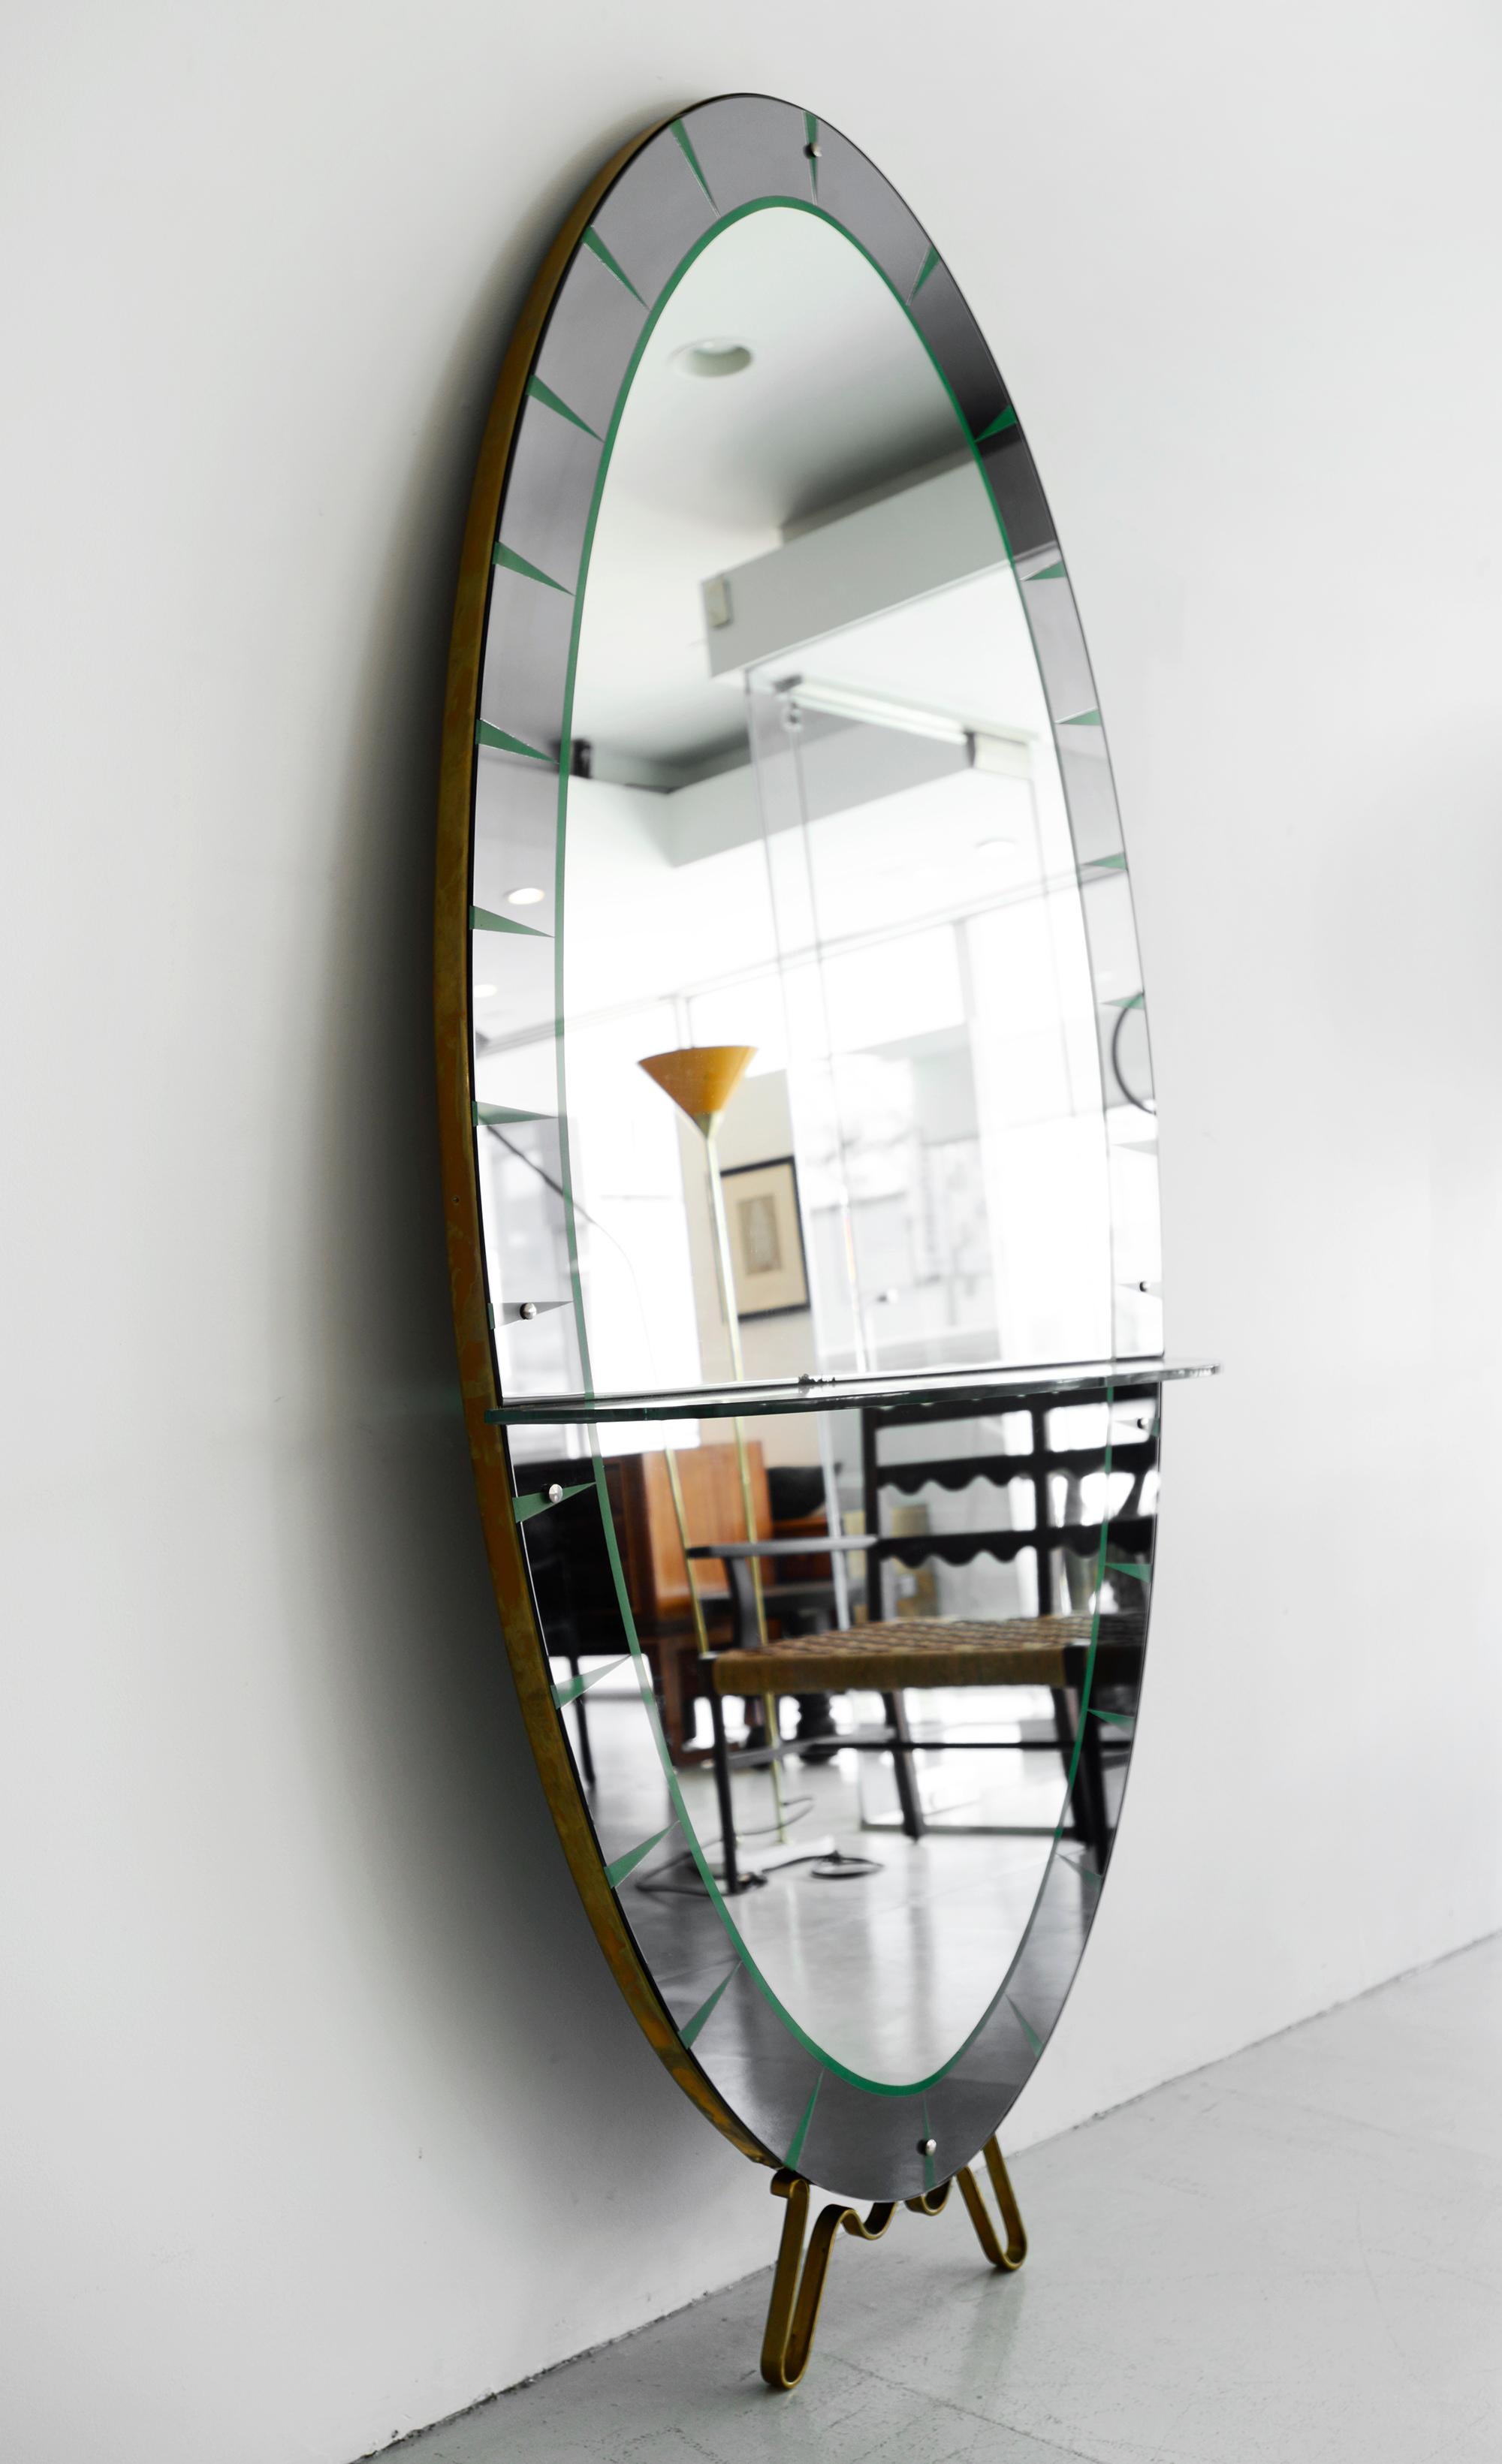 Cristal art mirror with glass shelf, green etched detail, and brass.